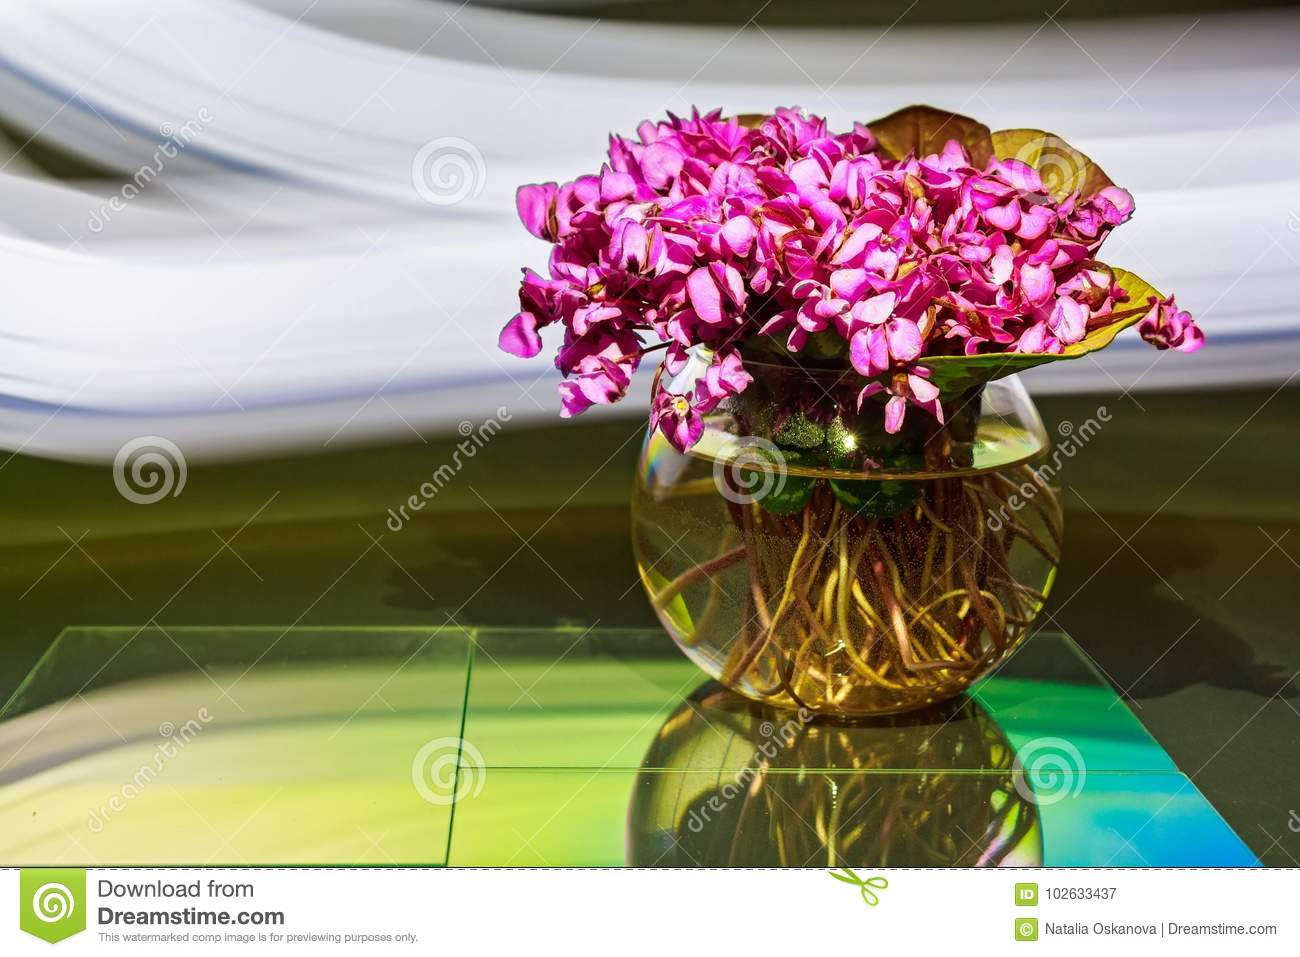 16 Recommended Small Glass Vase Flower Arrangements 2024 free download small glass vase flower arrangements of bouquet of violet flowers or viola odorata in bowl stock image throughout bouquet of violet flowers or viola odorata in bowl